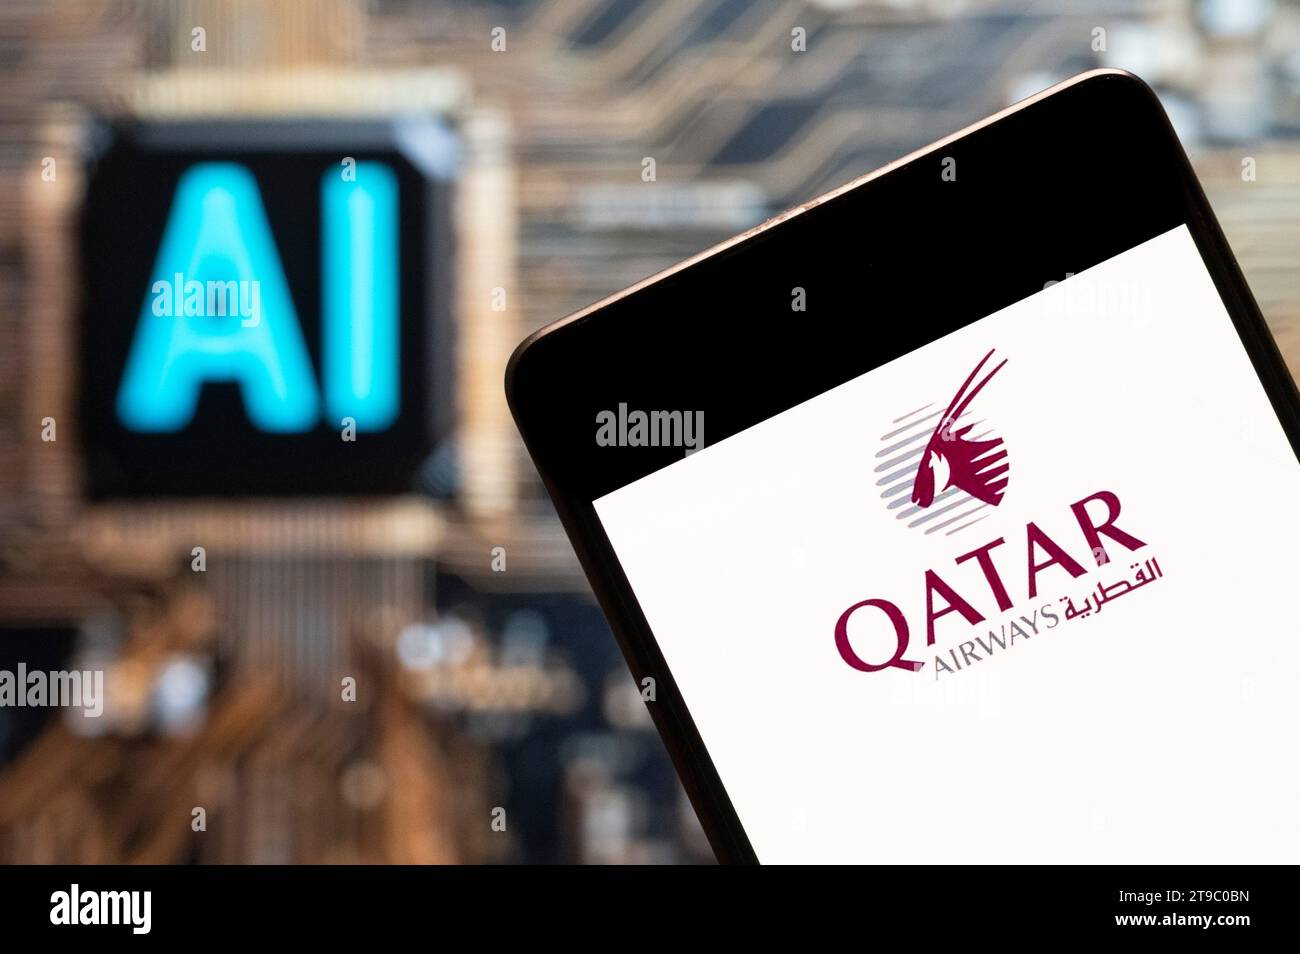 In this photo illustration, the state-owned flag carrier airline of Qatar, Qatar Airways logo seen displayed on a smartphone with an Artificial intelligence (AI) chip and symbol in the background. (Photo by Budrul Chukrut / SOPA Images/Sipa USA) *** Strictly for editorial news purposes only *** Stock Photo